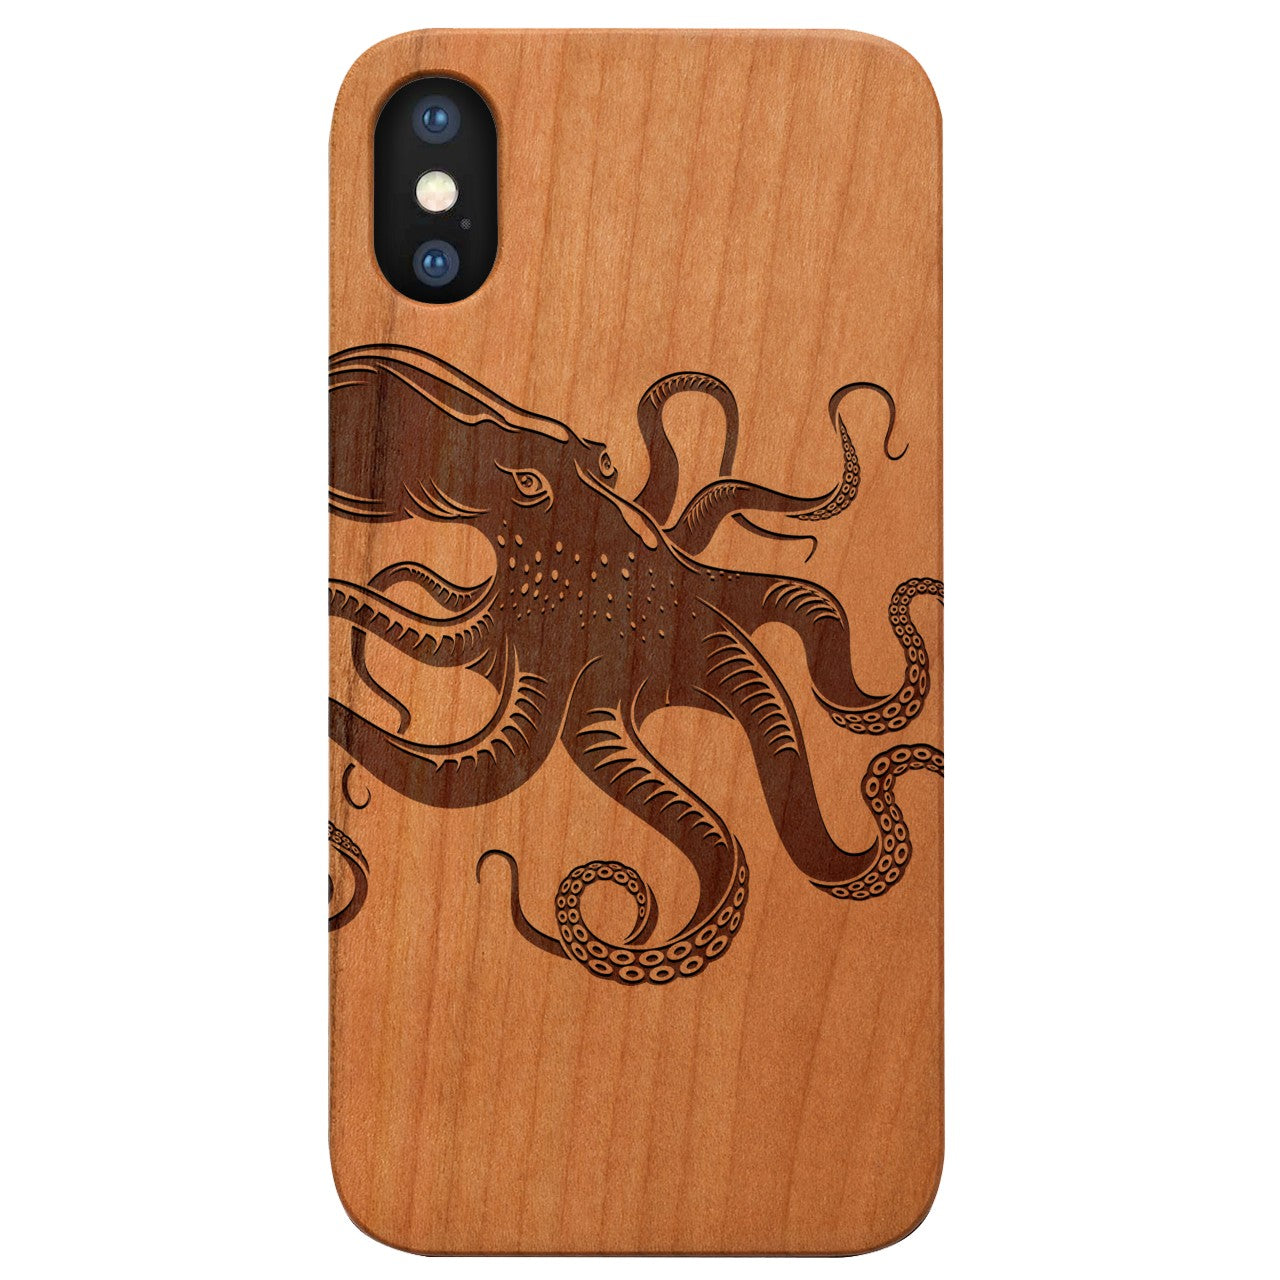  Octopus - Engraved - Wooden Phone Case - IPhone 13 Models